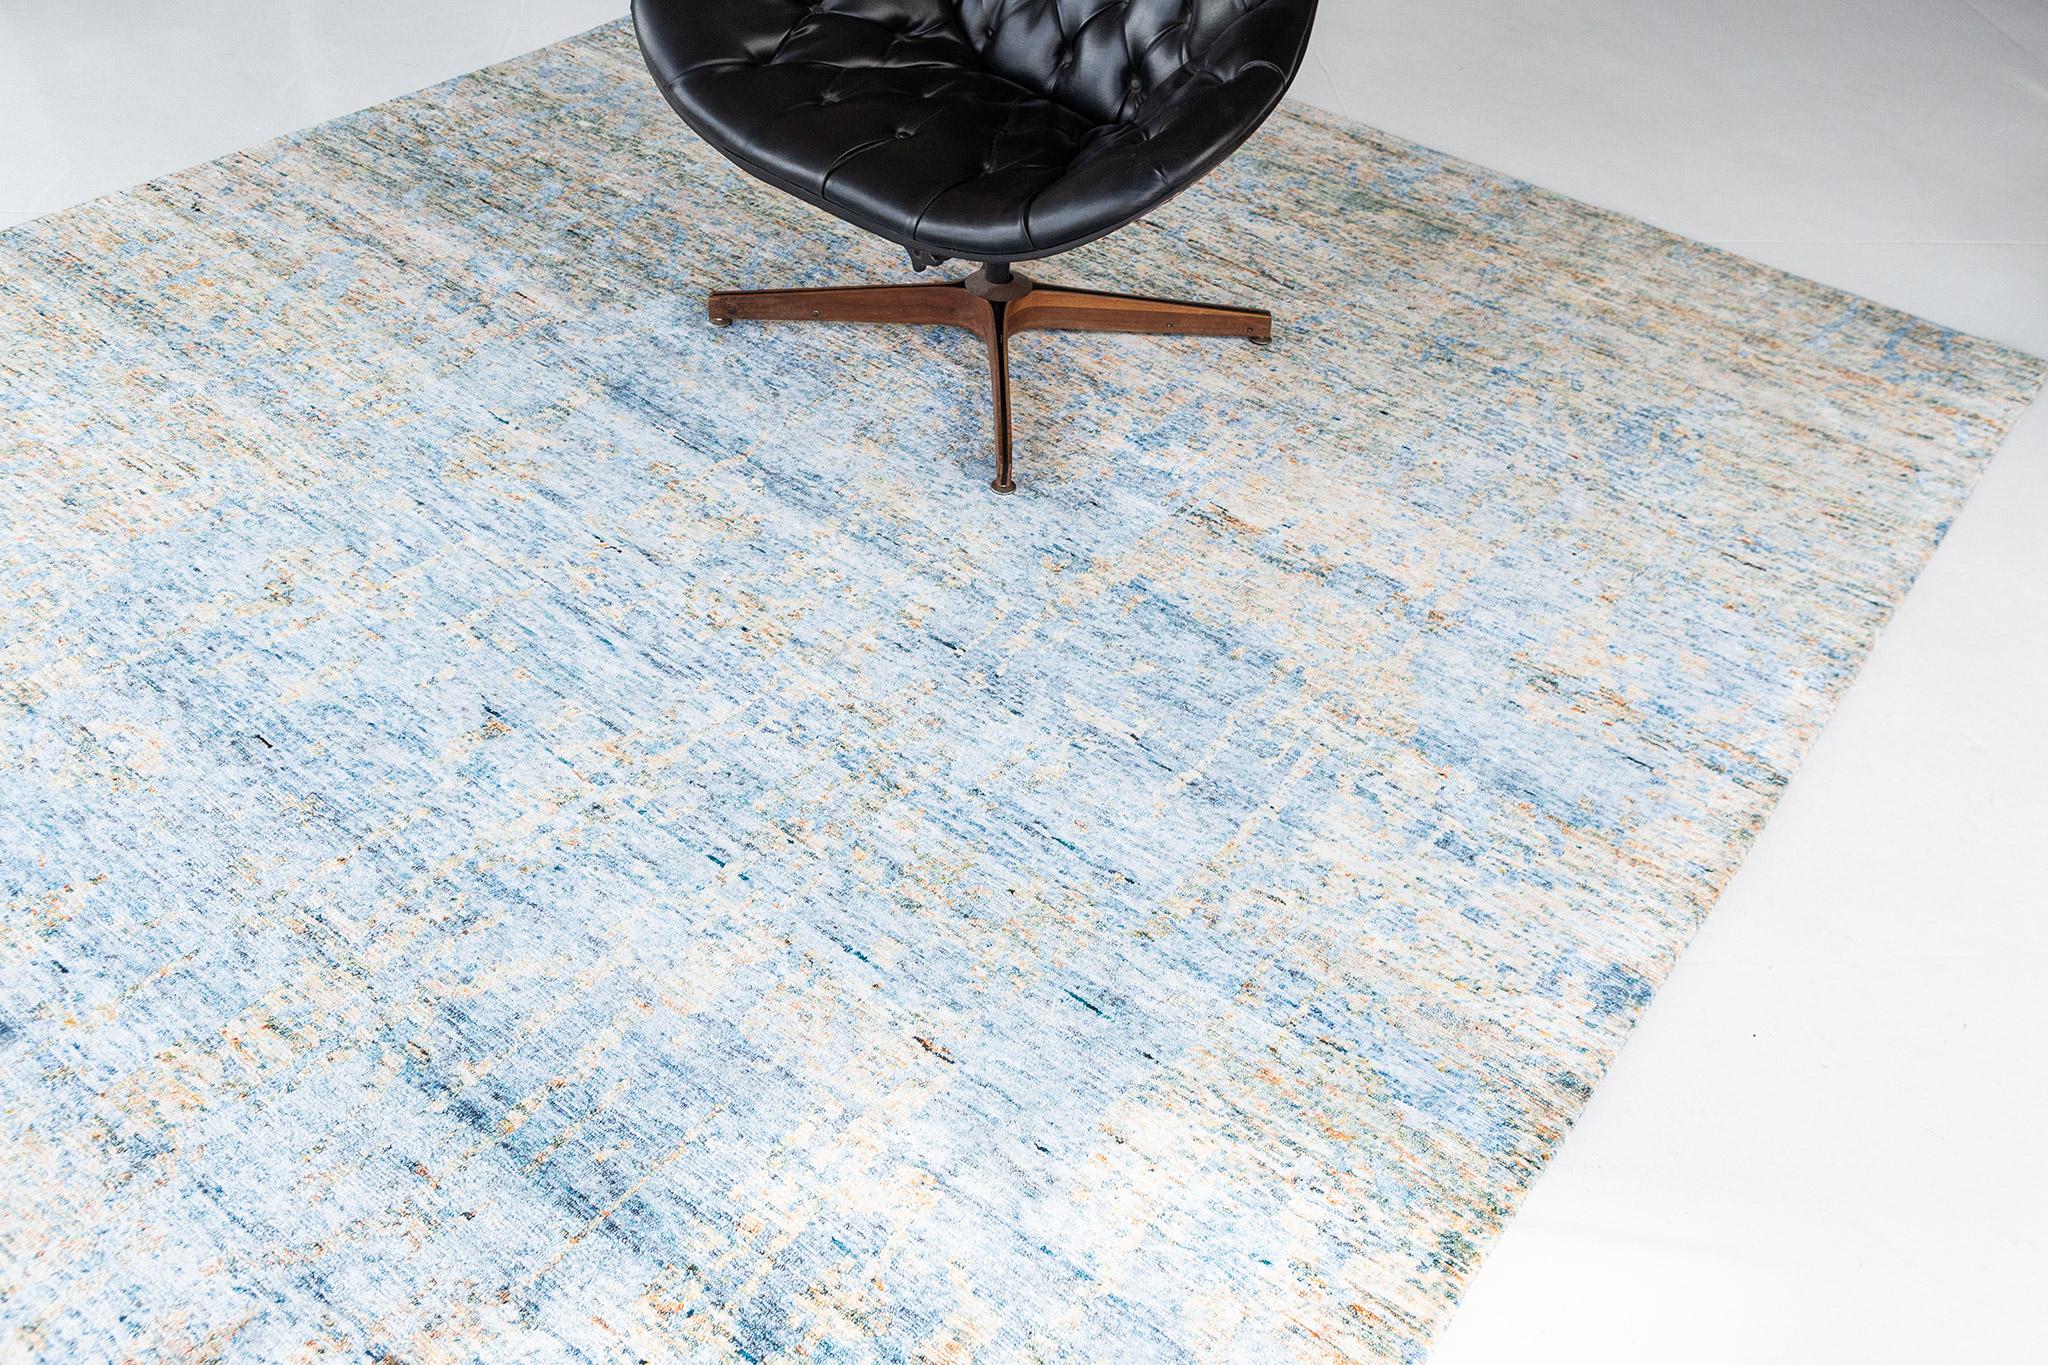 Maruti is bamboo silk in a stunning earthy tone with a beautiful vague representation. A masterpiece that feels like spring because of its warm ambiance. The soft detailed yet elegant interior further brings out the artistry of this rug.

Rug